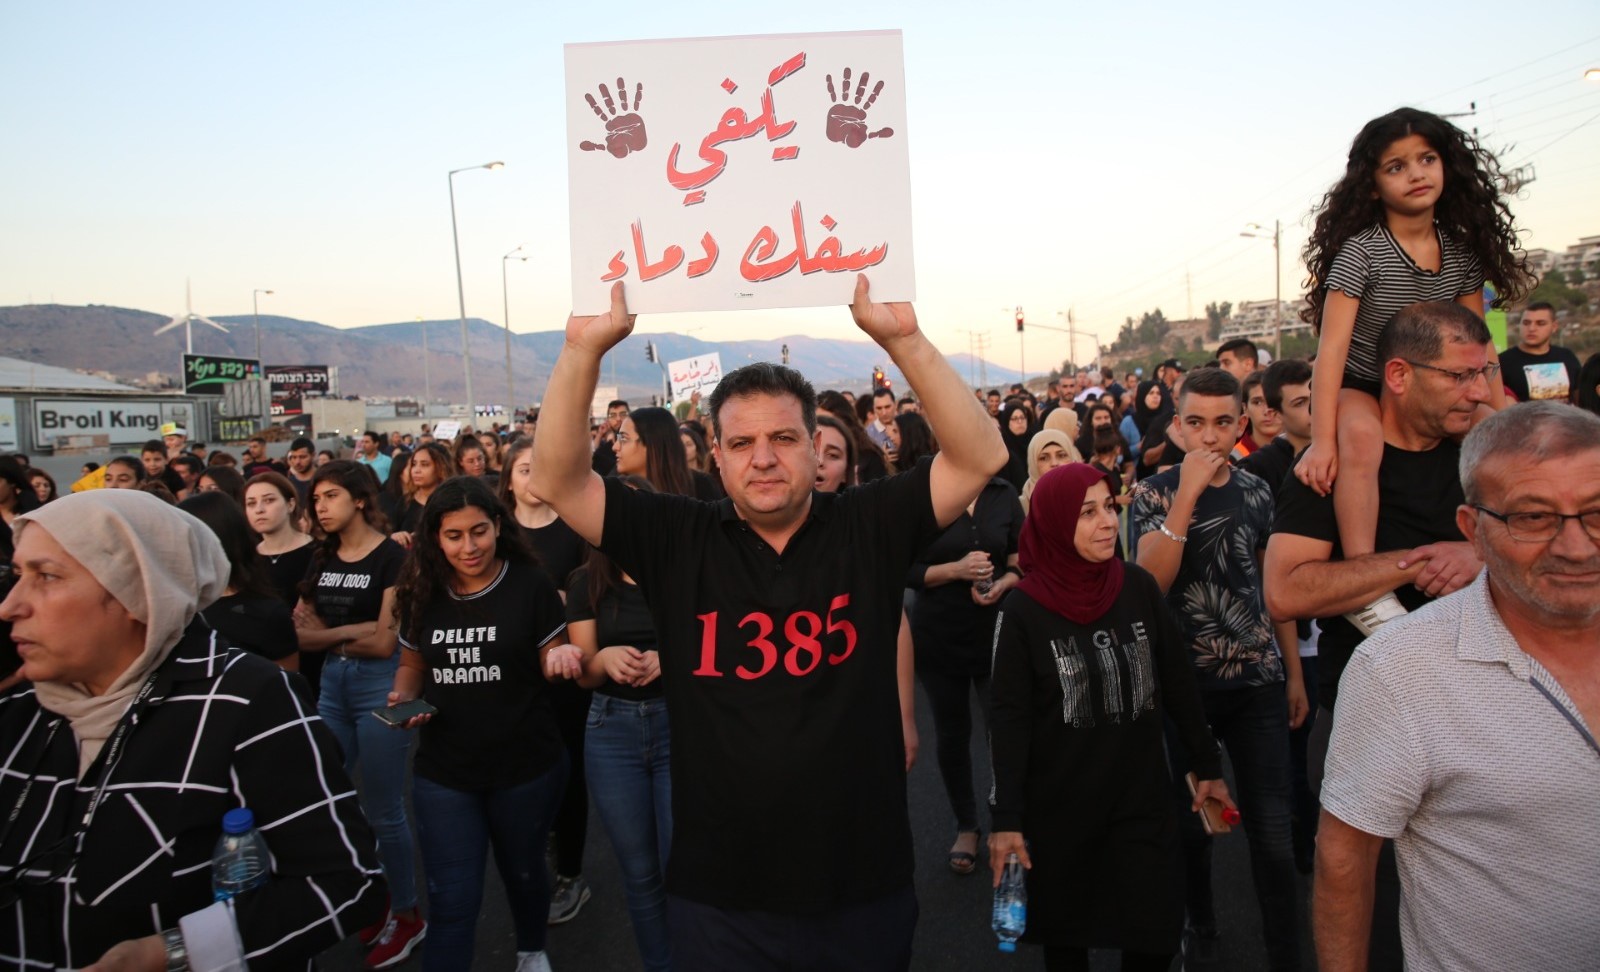 MK Ayman Odeh during the demonstration against violence, last Tuesday in Majd al-Krum; the sign he's holding aloft reads "Enough bloodshed." The number 1385 on his shirt is the toll of Arab citizens of Israel who have died since the year 2000 as a result of violence.